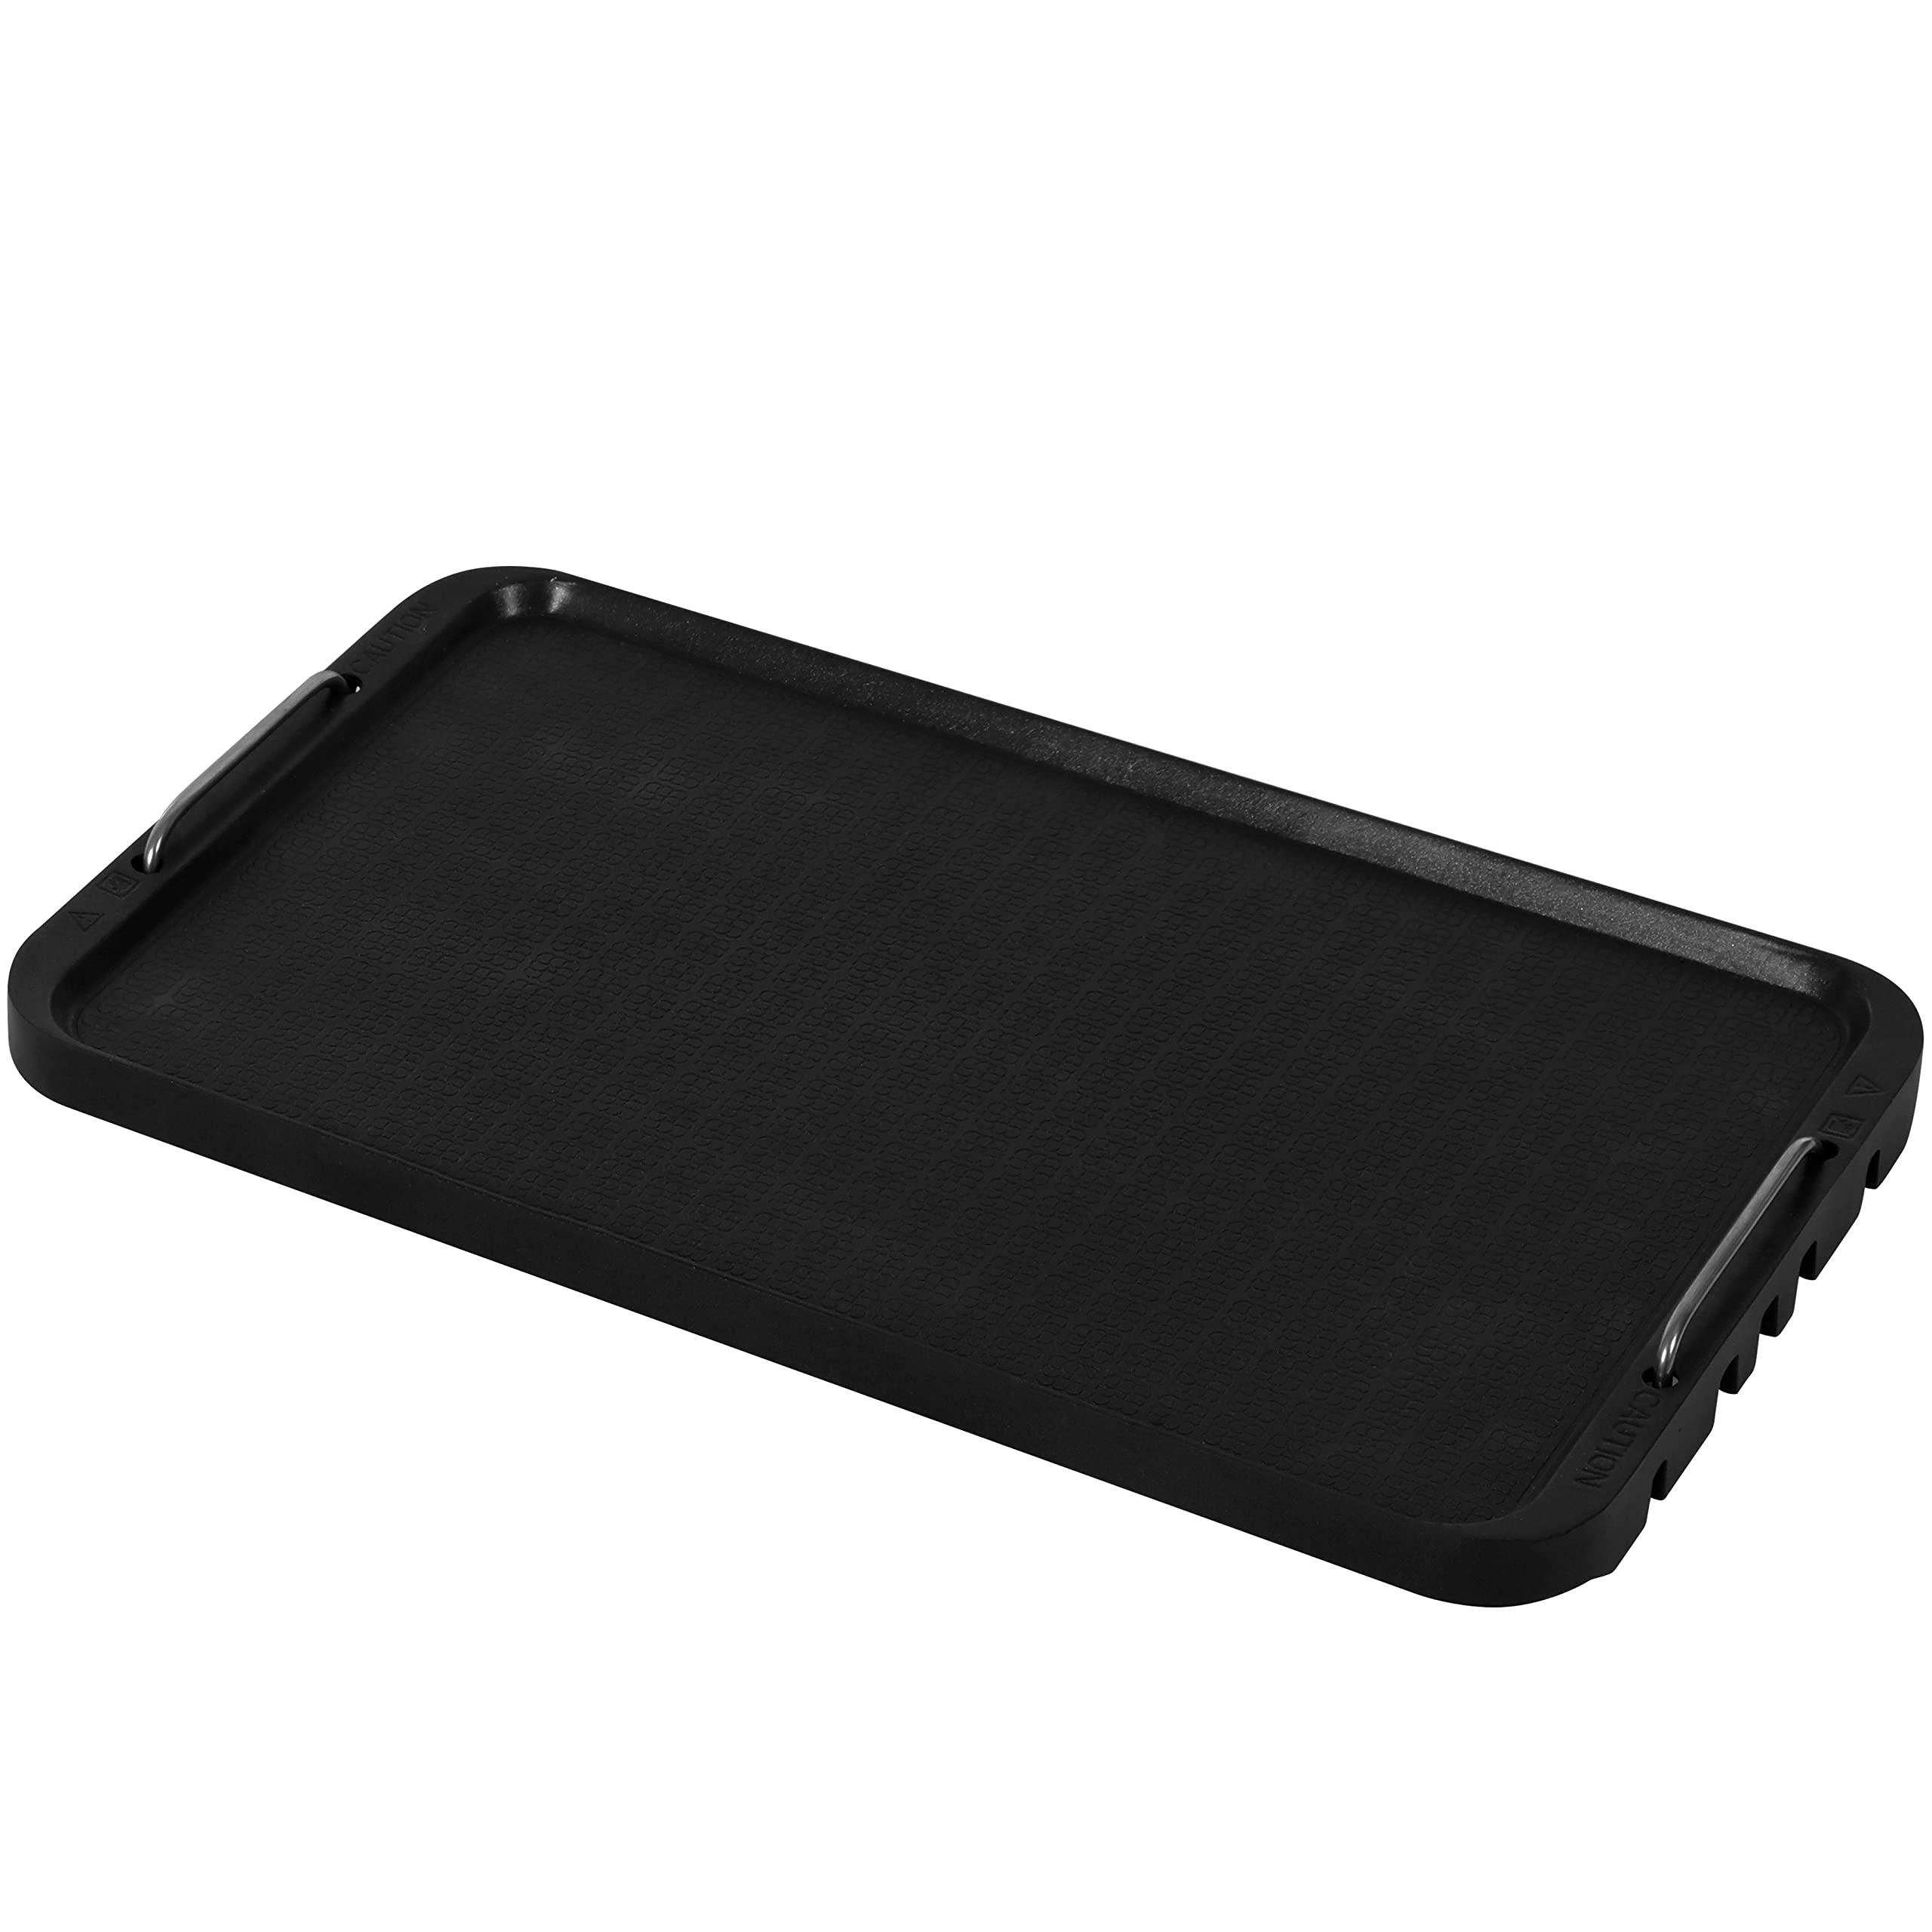 CMRG-200 Non-Stick Griddle Grill Pan